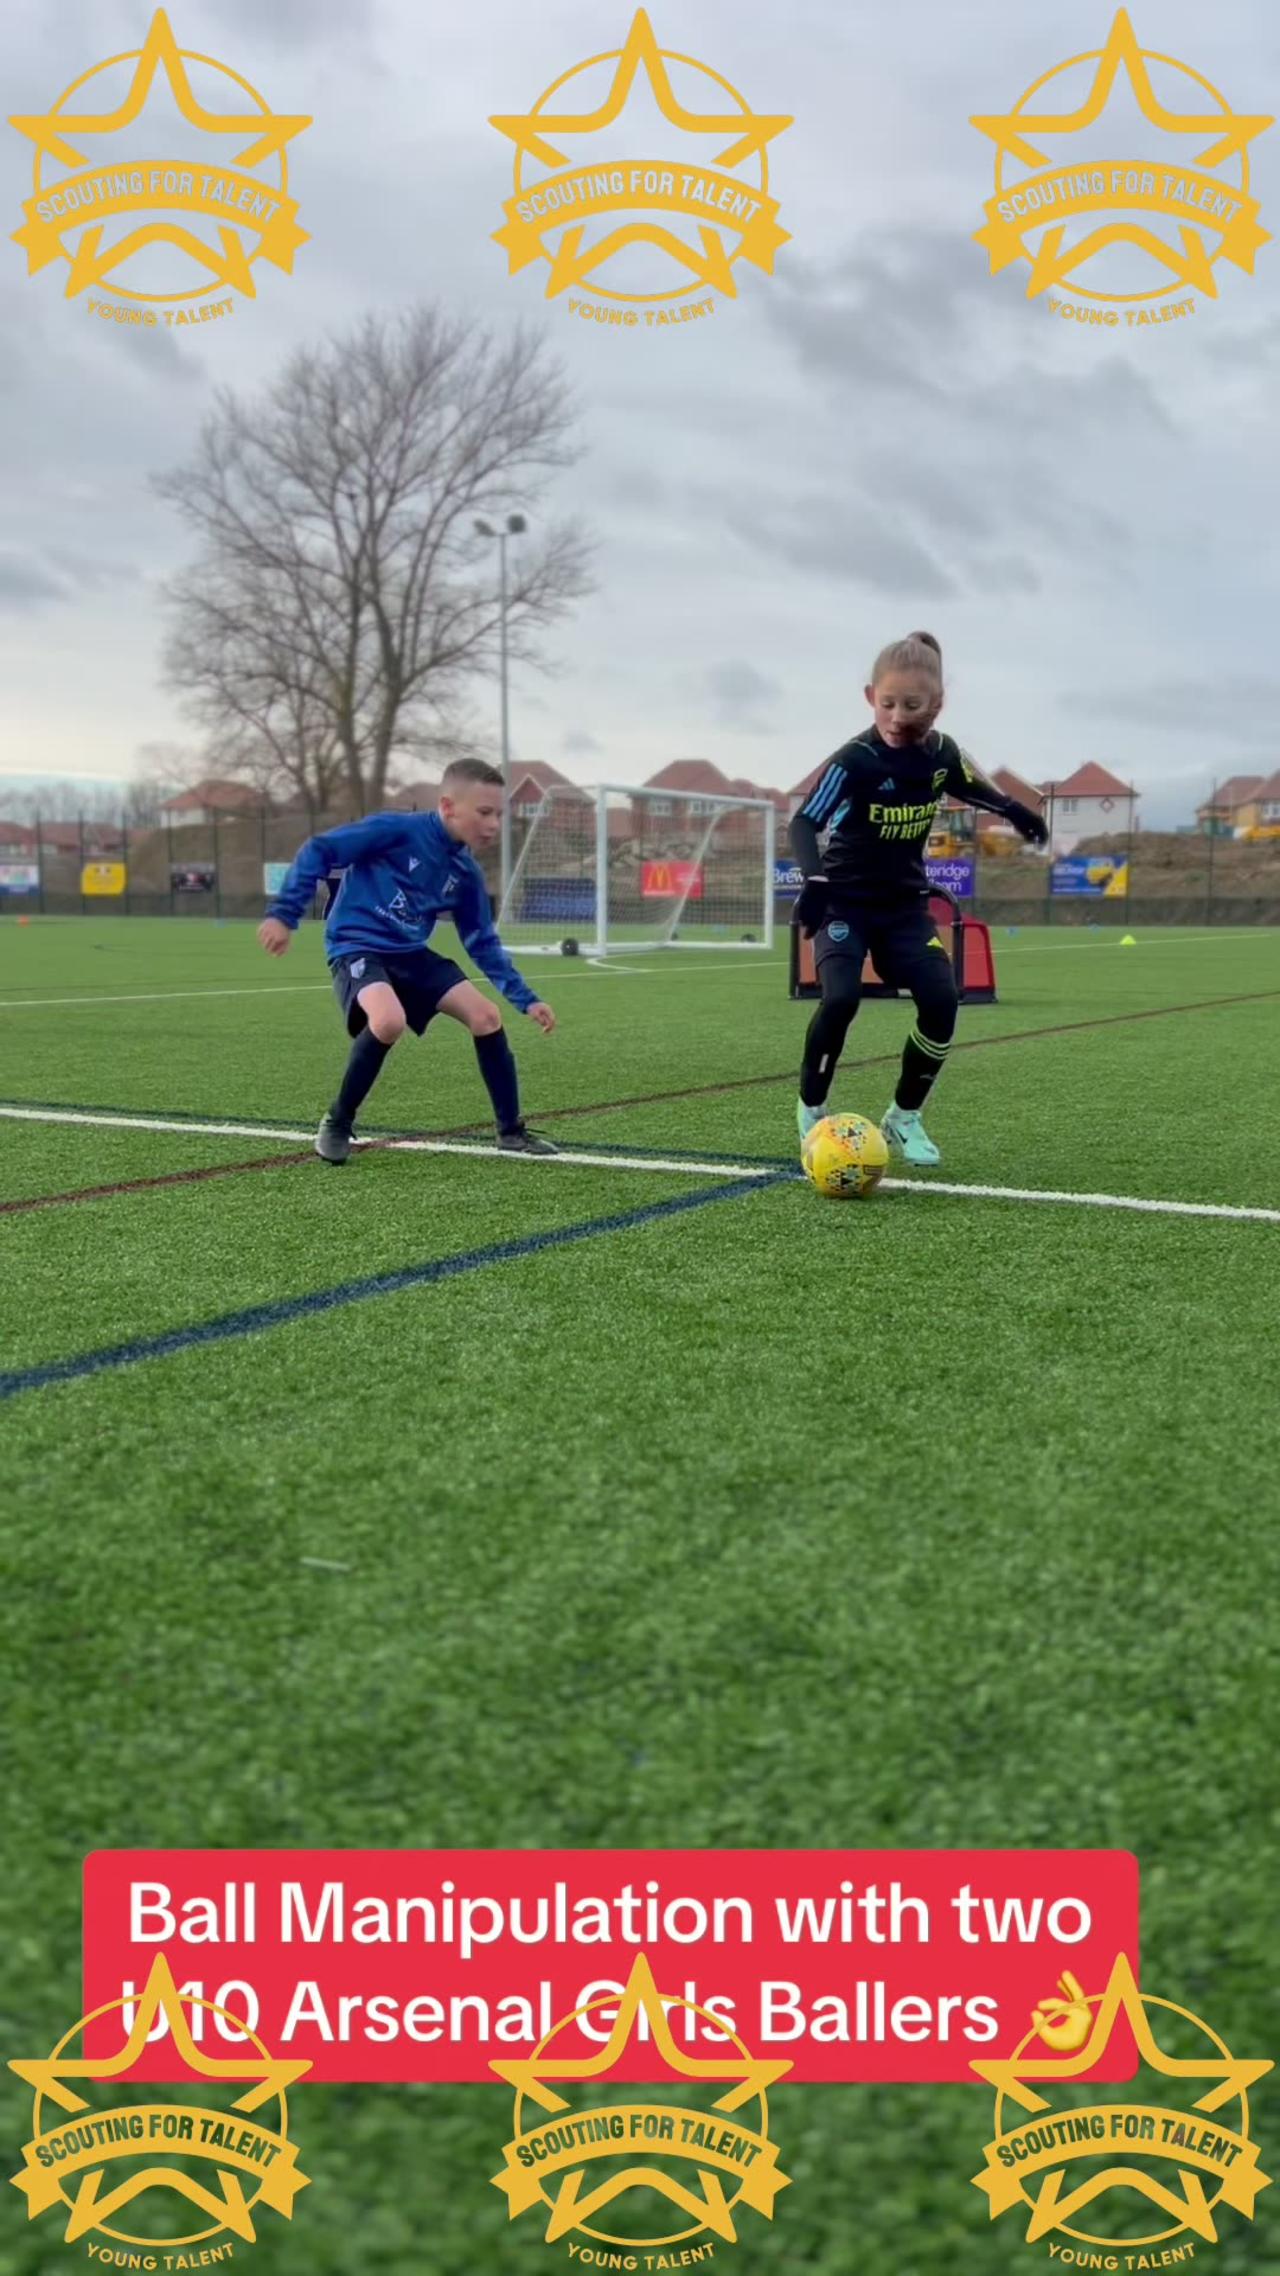 Ball manipulation with two U10 Arsenal Girl Ballers,